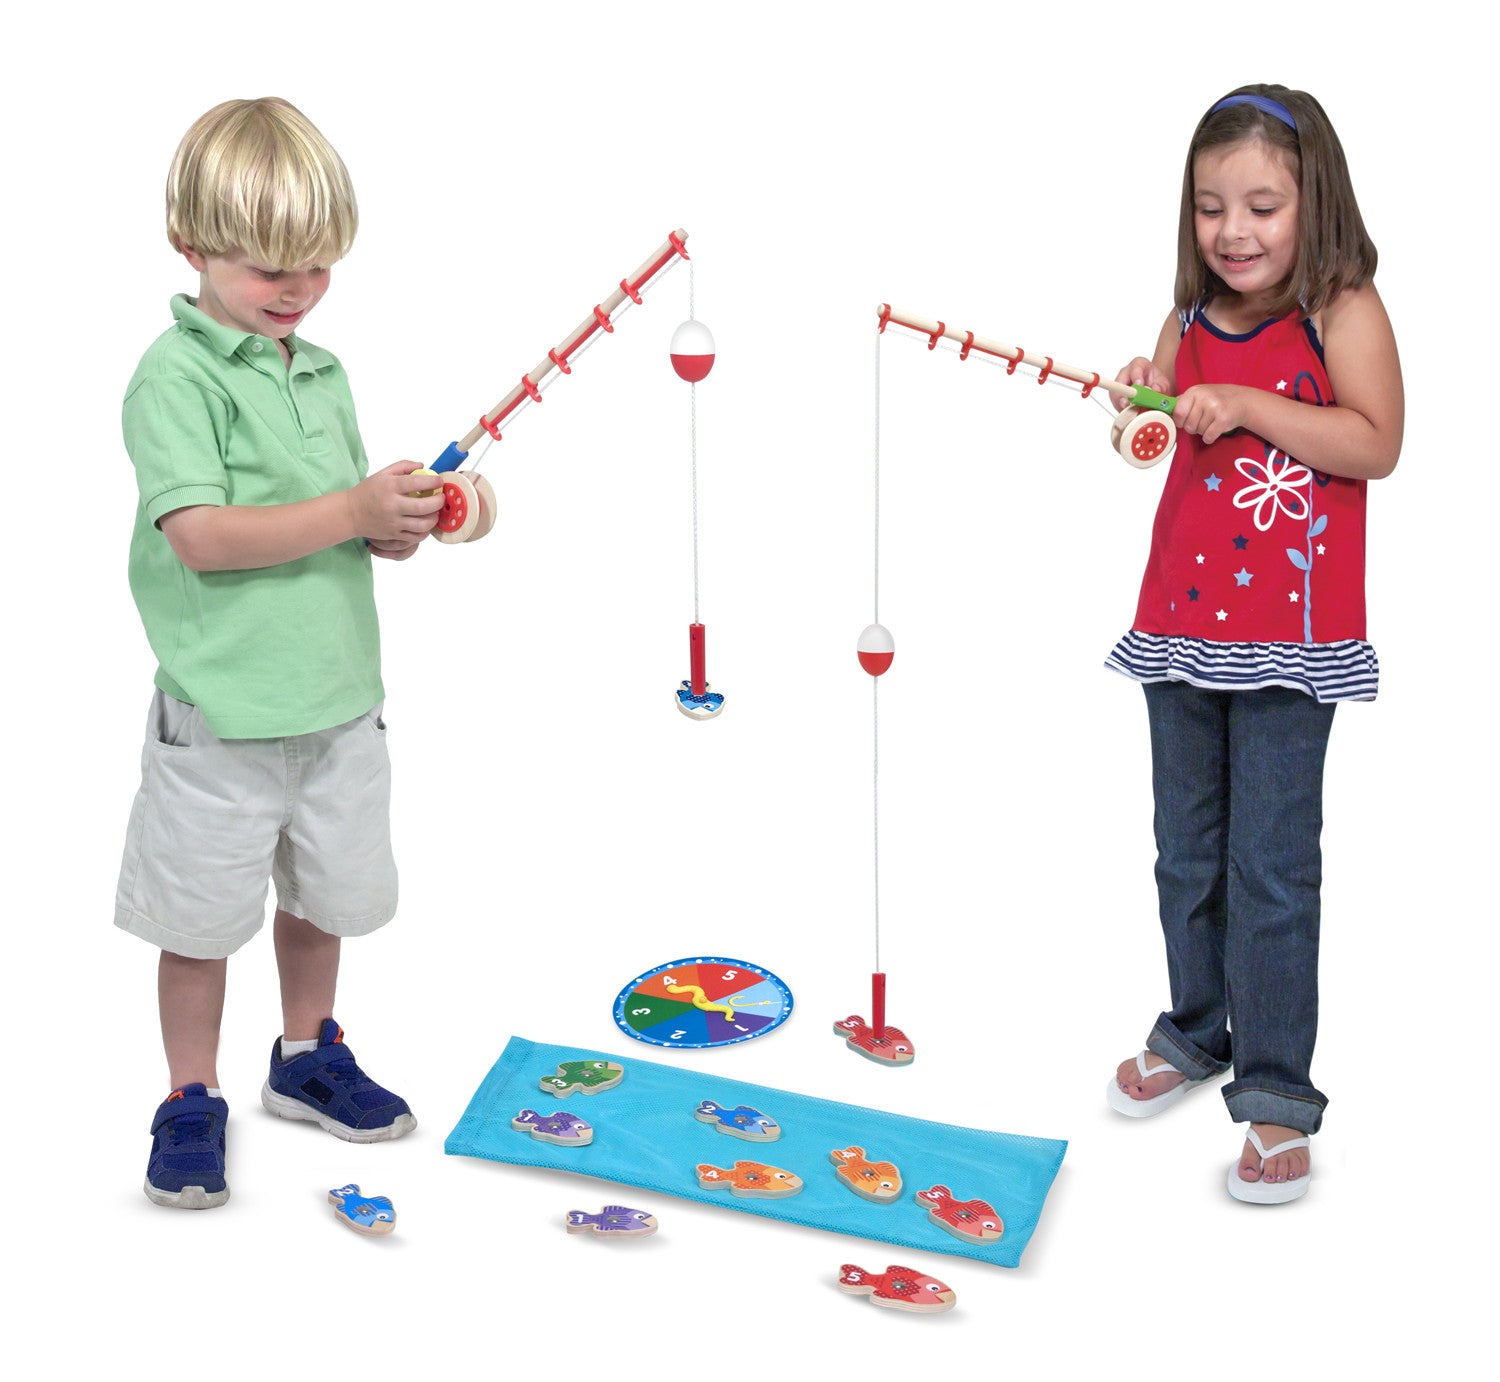 26MF131 - Melissa & Doug Catch and Count Fishing Game